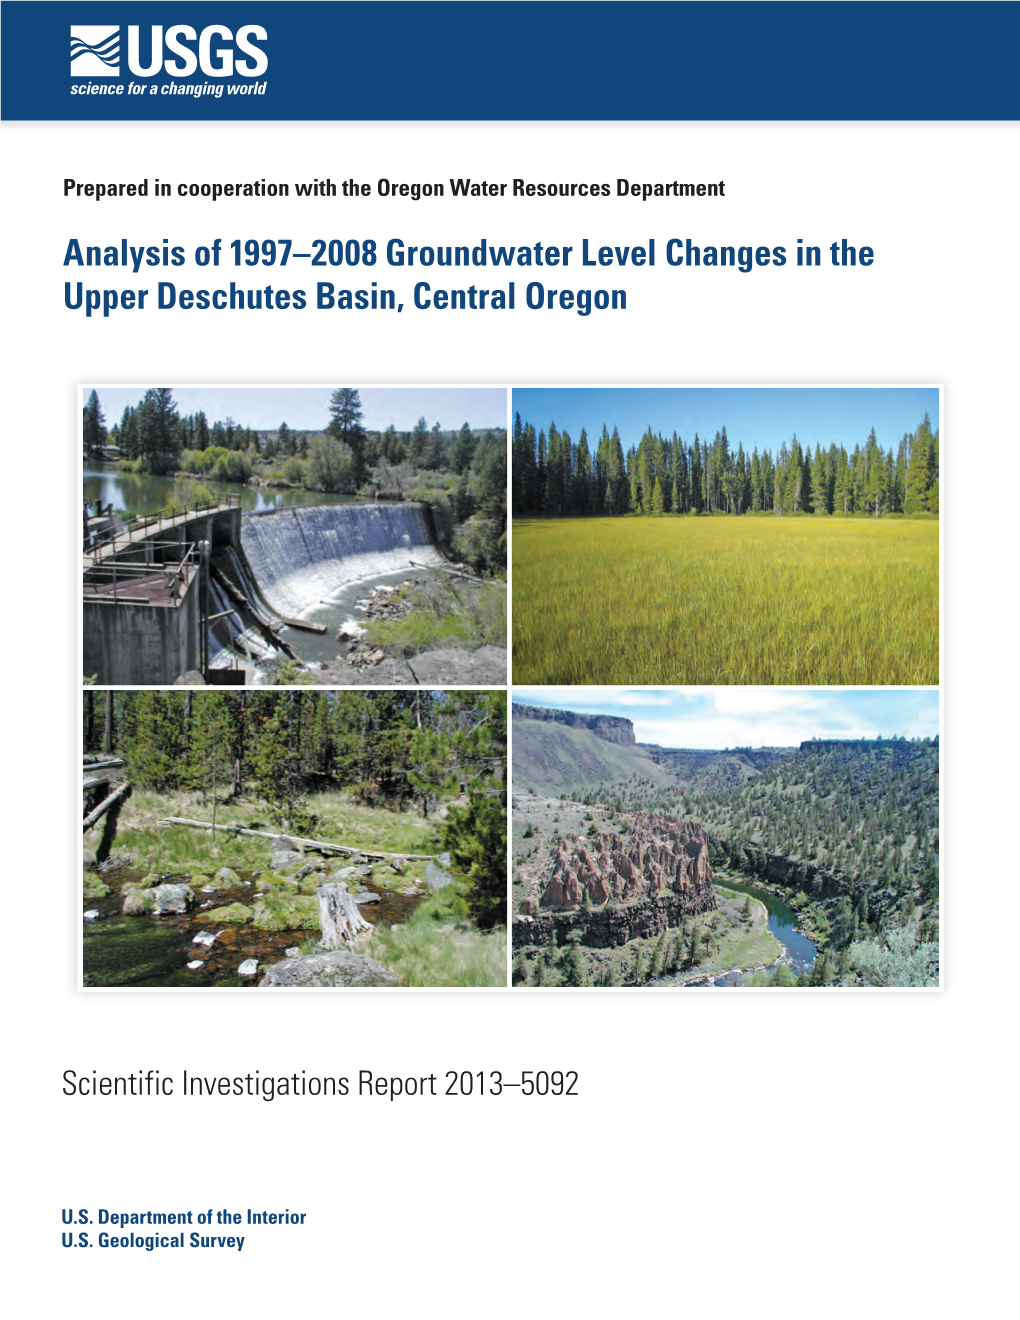 Analysis of 1997–2008 Groundwater Level Changes in the Upper Deschutes Basin, Central Oregon